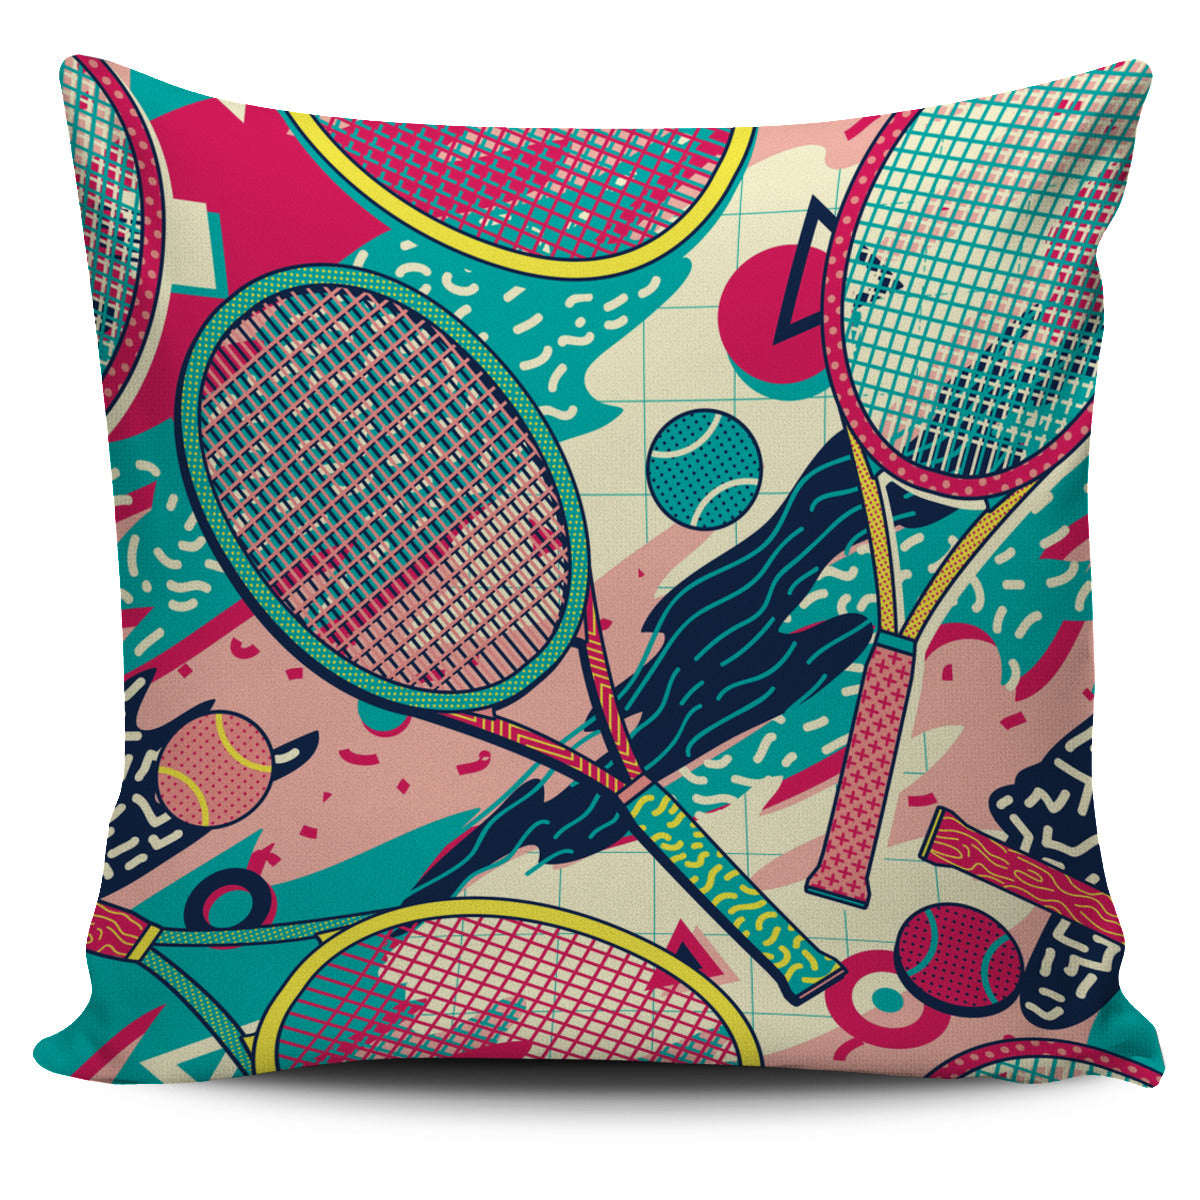 Colorful Tennis Pillow Cover